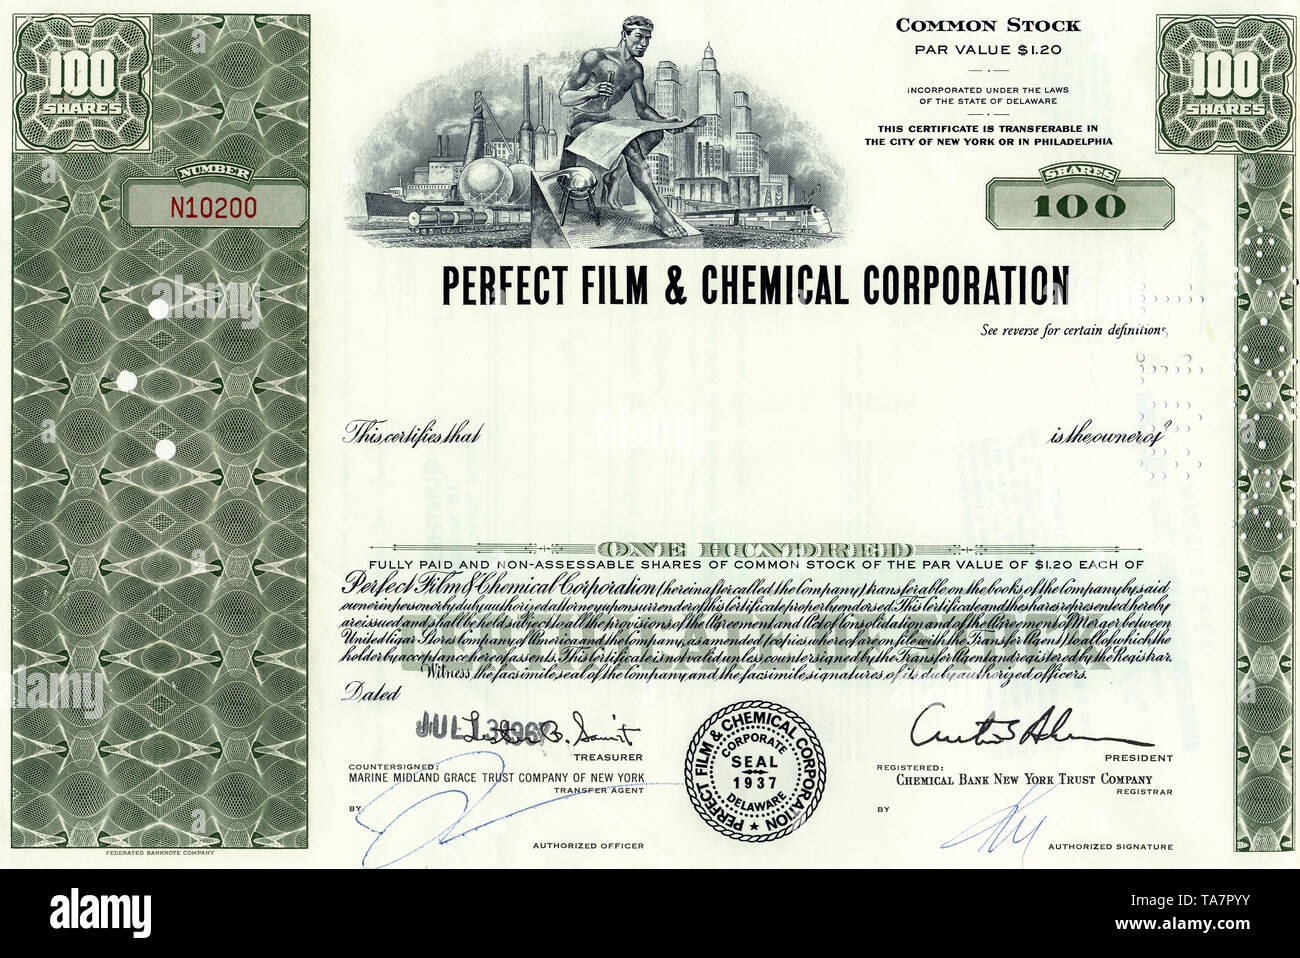 a historical stock certificate of a medical publishing house, a man with paraphernalia for chemistry in front of a factory and a city, Perfect Film and Chemical Corporation, Delaware, USA, 1967, Wertpapier, historische Aktie, Motiv: Ein Mann mit Chemie Utensilien vor ein Fabrik und Stadt,  Medizinischer Verlag, Perfect  Film & Chemical Corporation, 1967, Delaware, USA Stock Photo